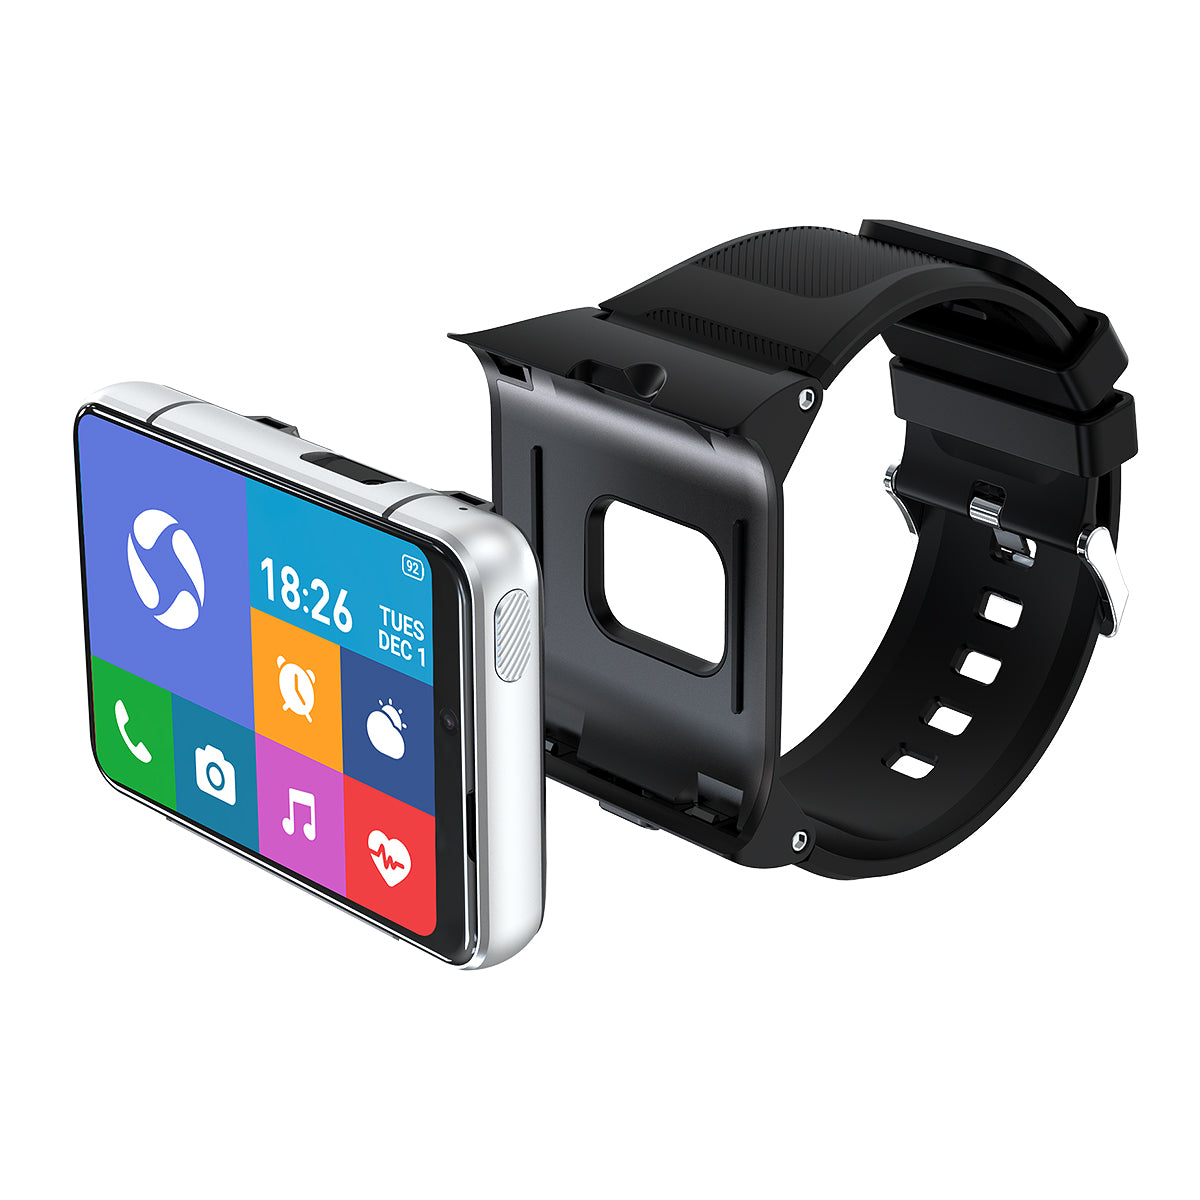 【SACOSDING】4G Large Screen Android Smart Watch